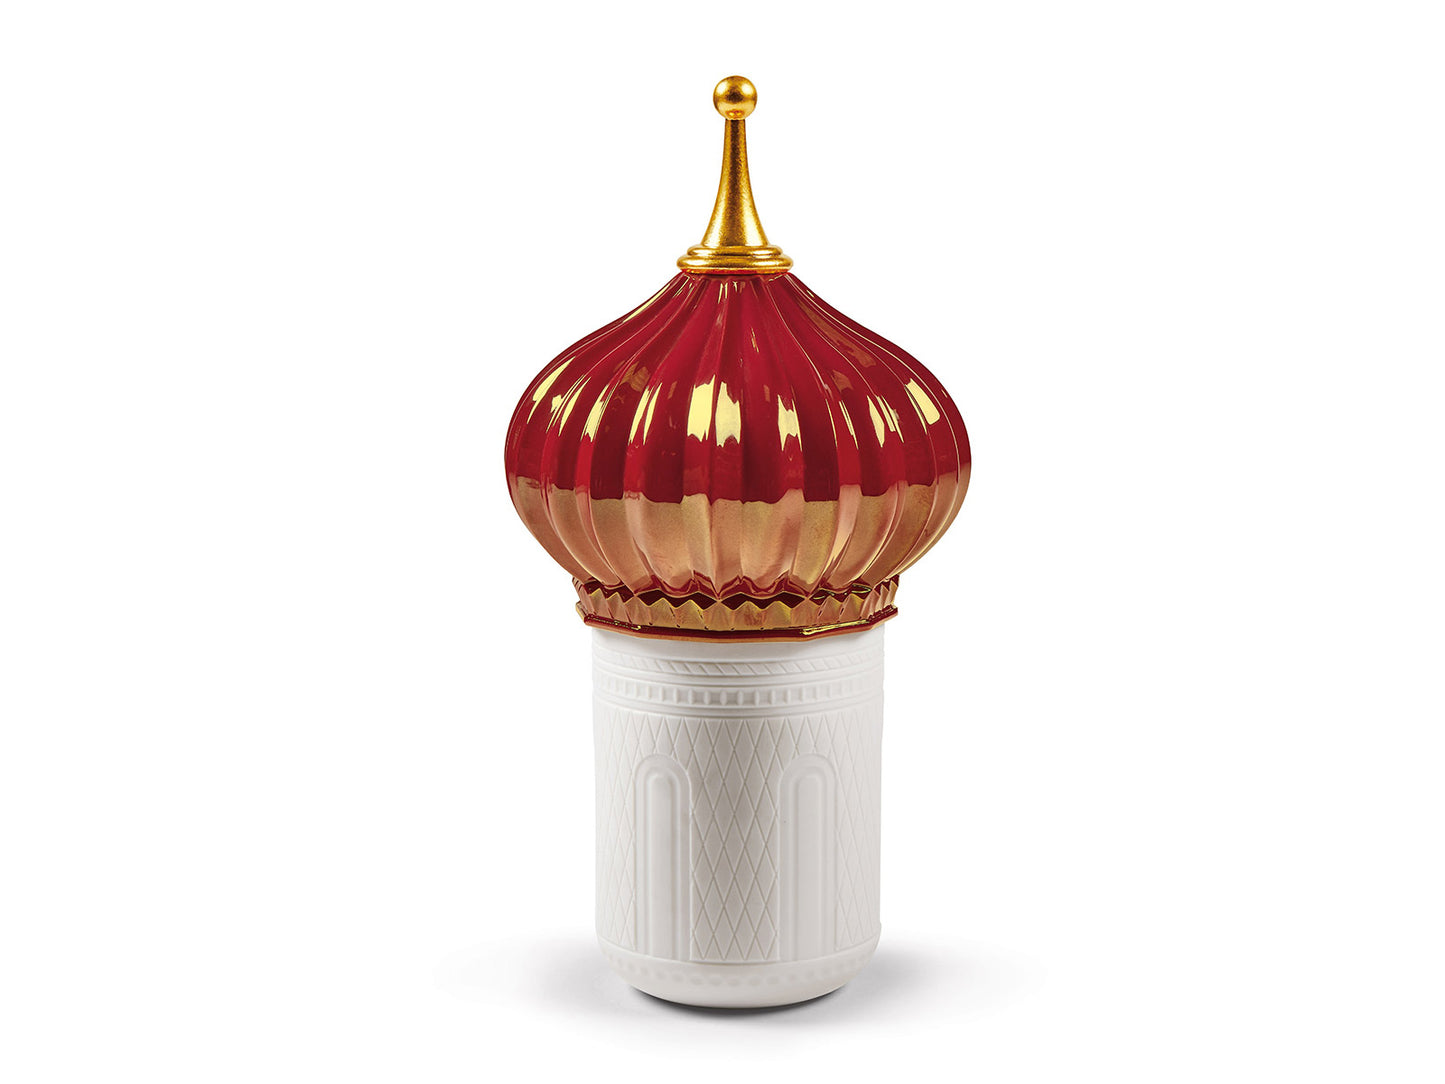 Lladro North Tower Candle 1001 Lights (Ruby) 01040173